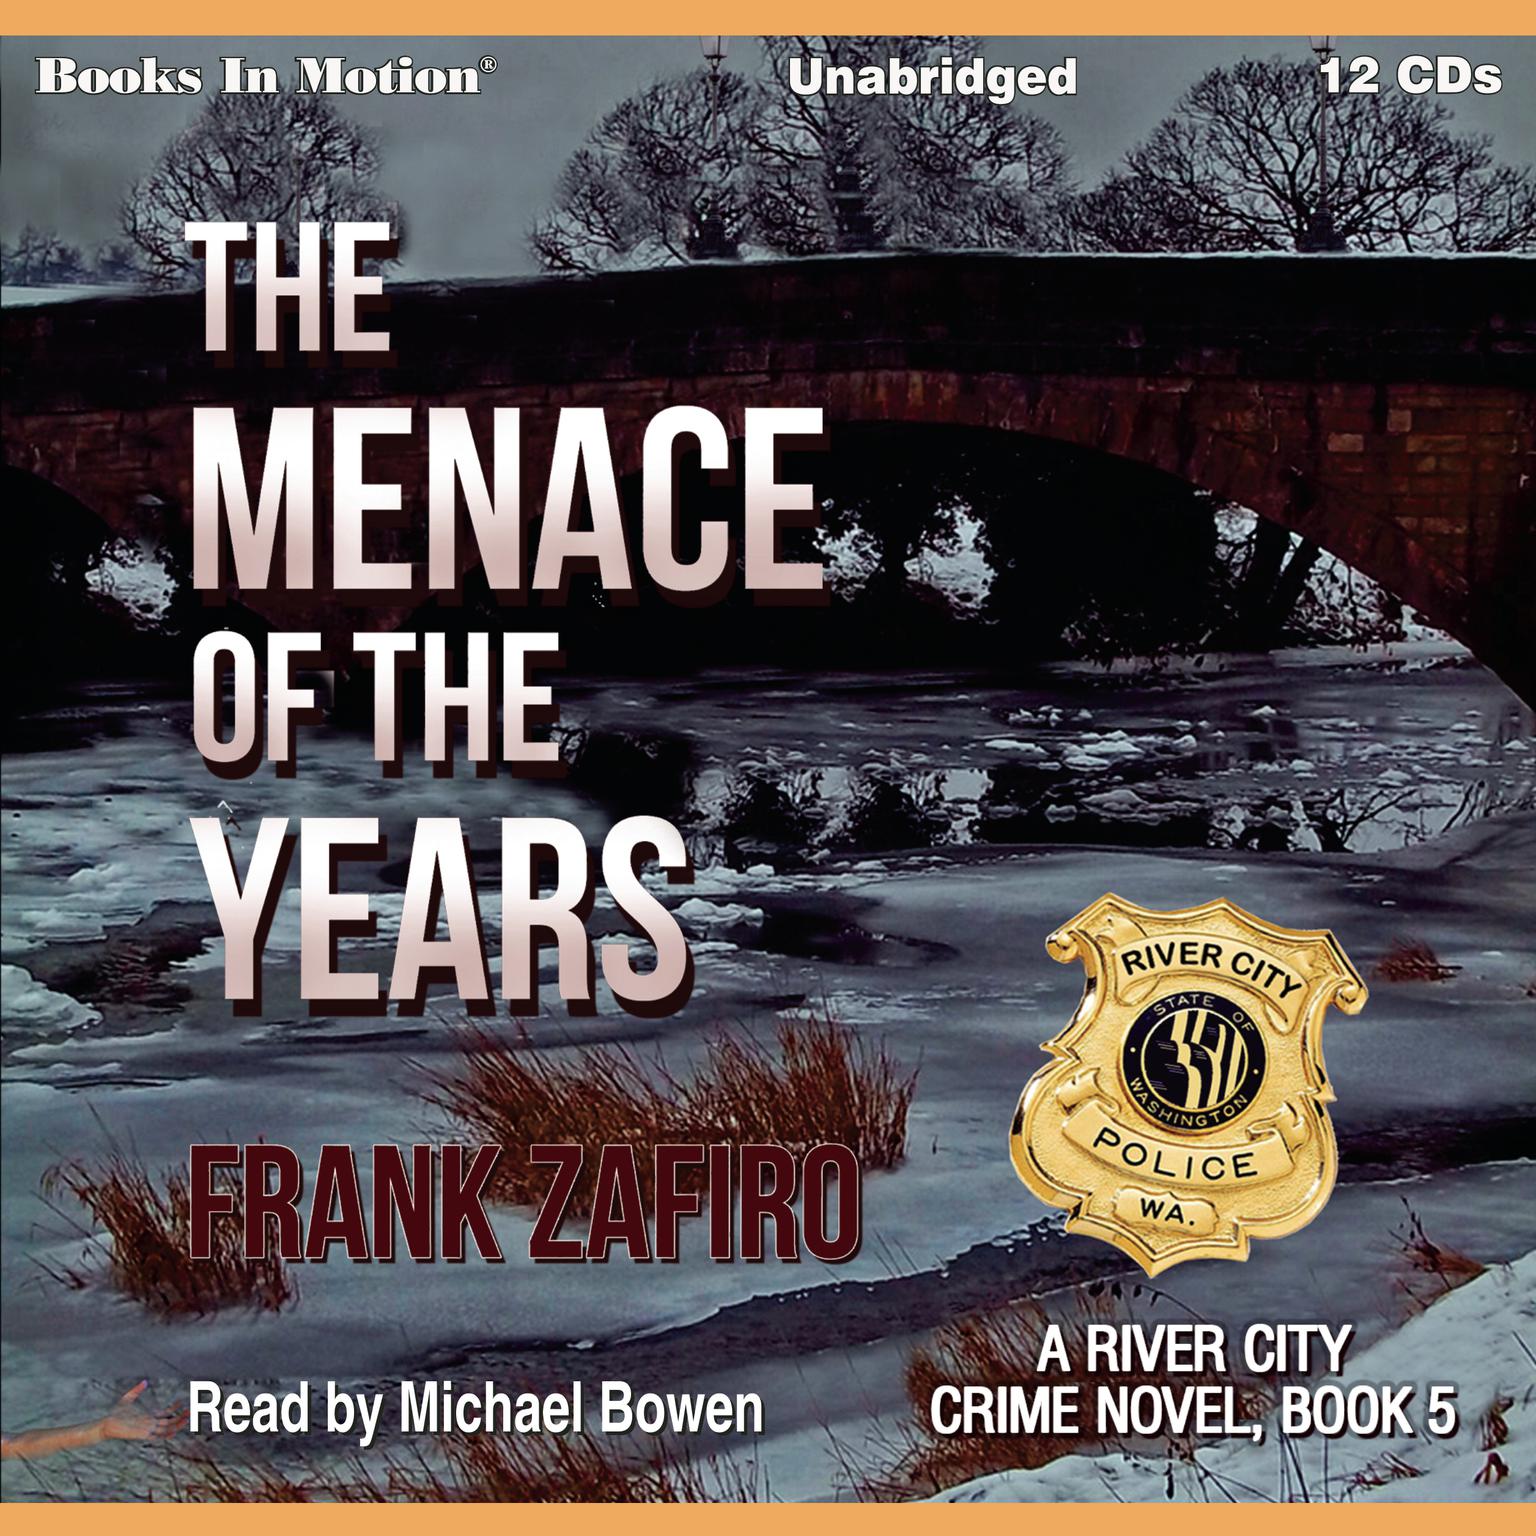 The Menace of the Years (The River City Crime Novel, Book 5) Audiobook, by Frank Zafiro